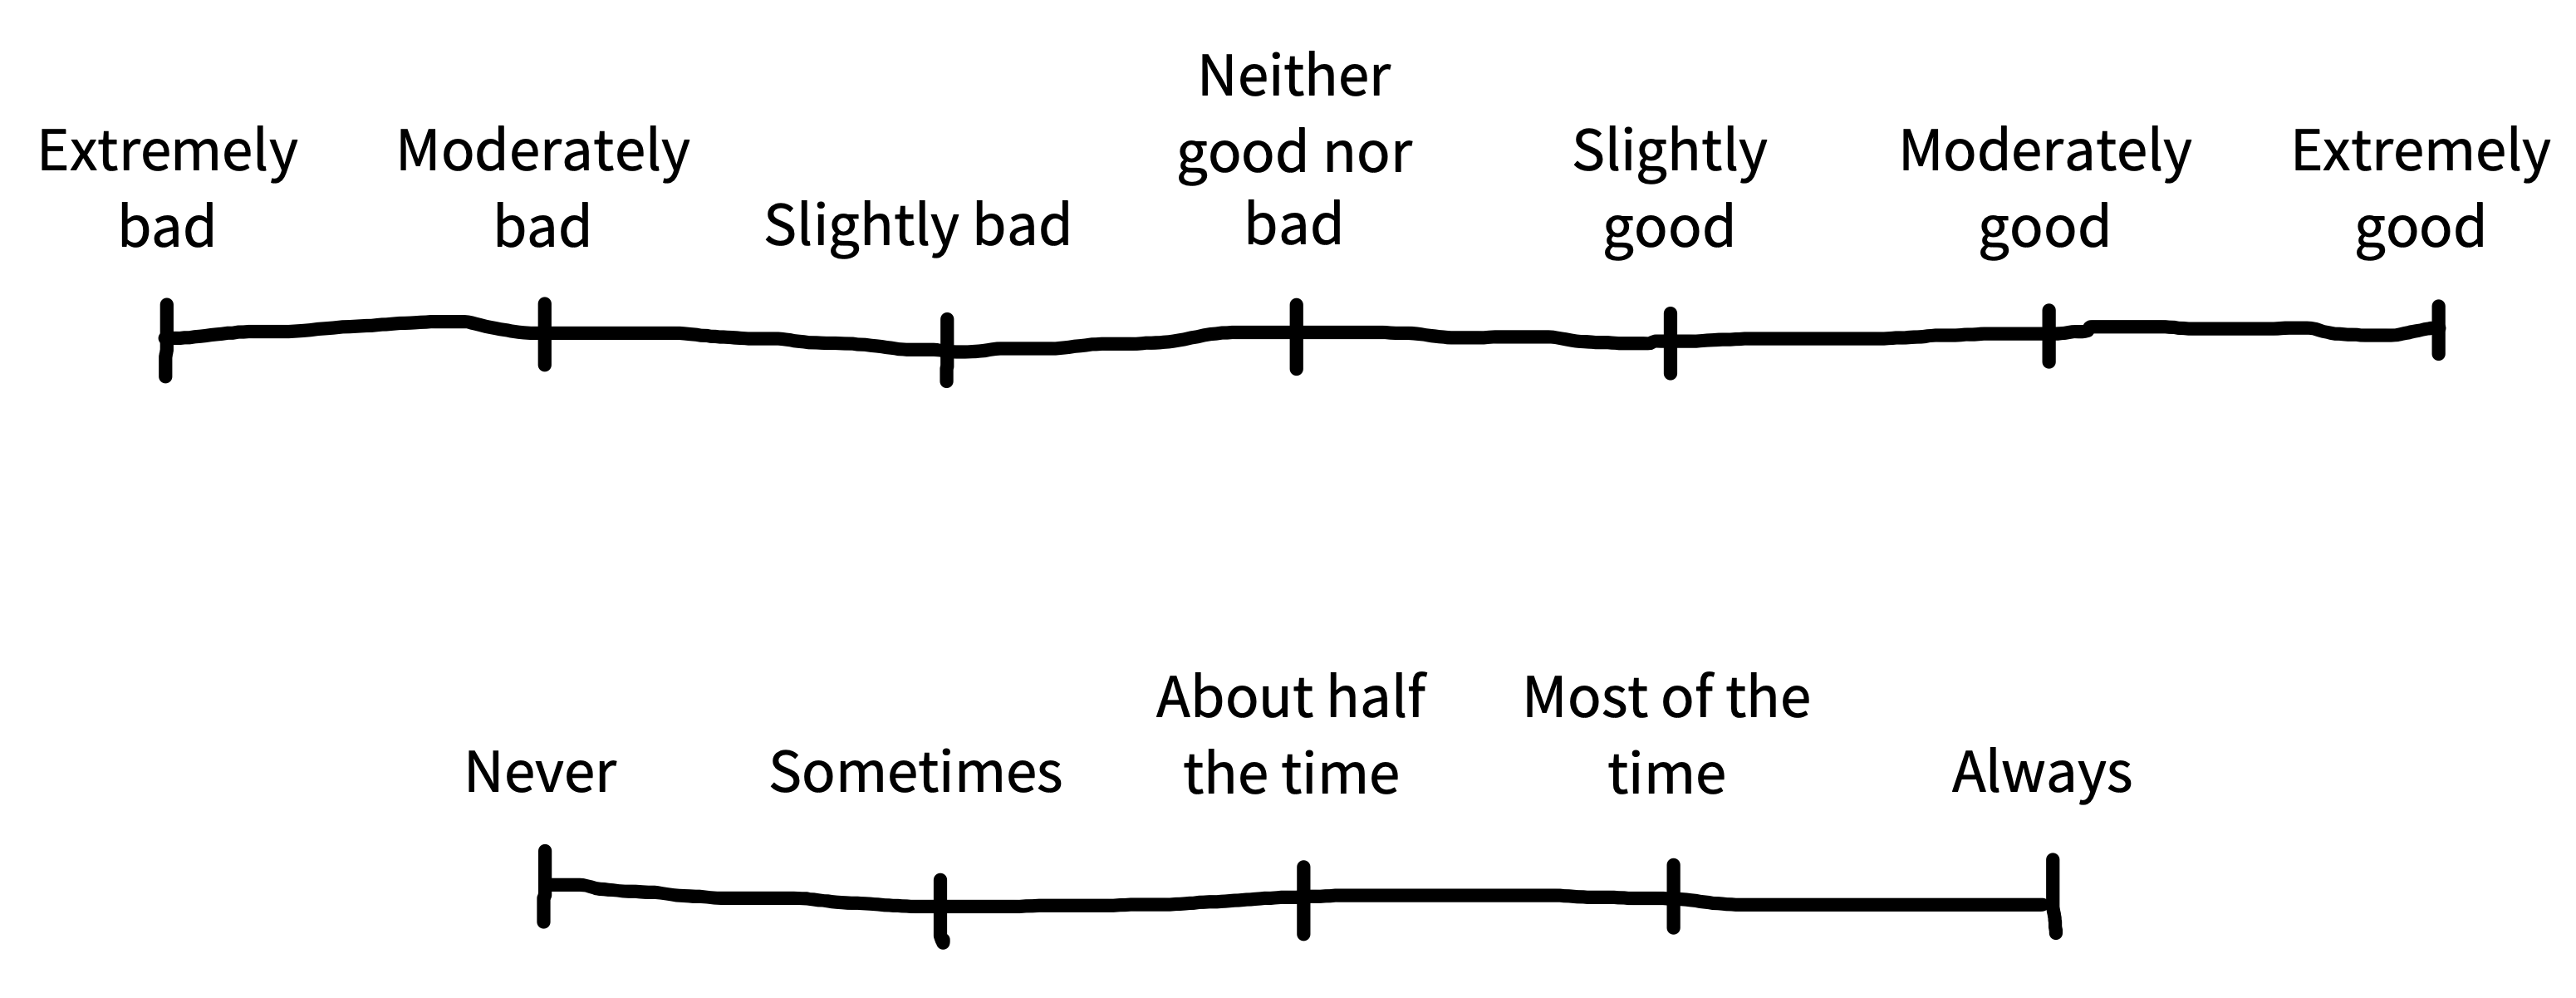 Likert scales based on survey best practices: a bipolar opinion scale with seven points and a unipolar frequency scale with five points. Both have all points labeled.